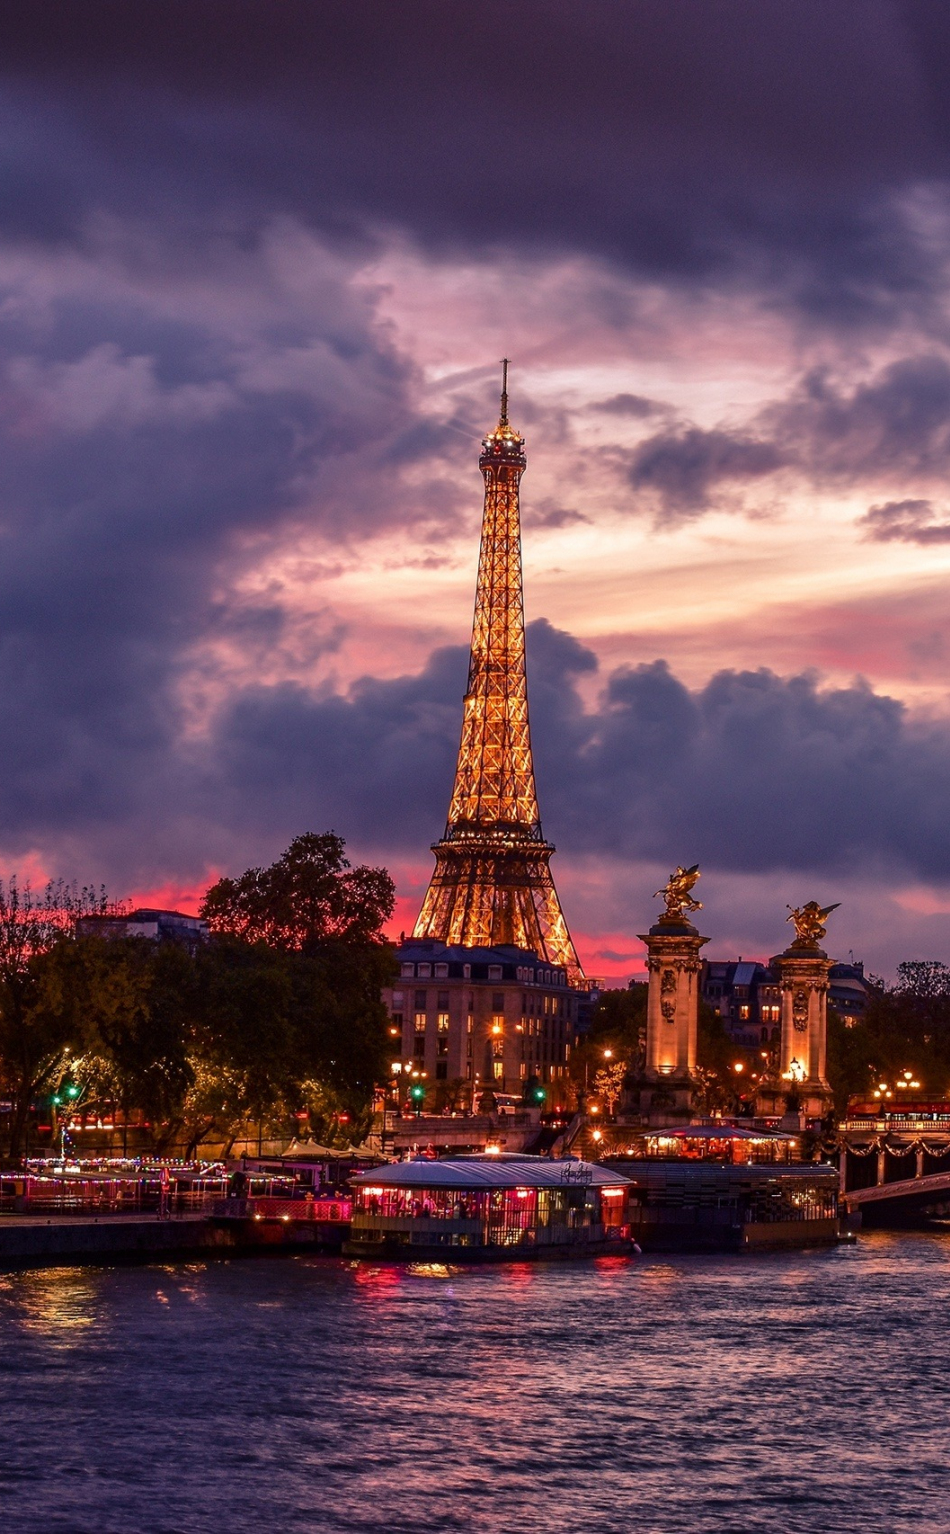 Download wallpaper 950x1534 eiffel tower, night, city, paris, clouds, iphone, 950x1534 HD background, 1030